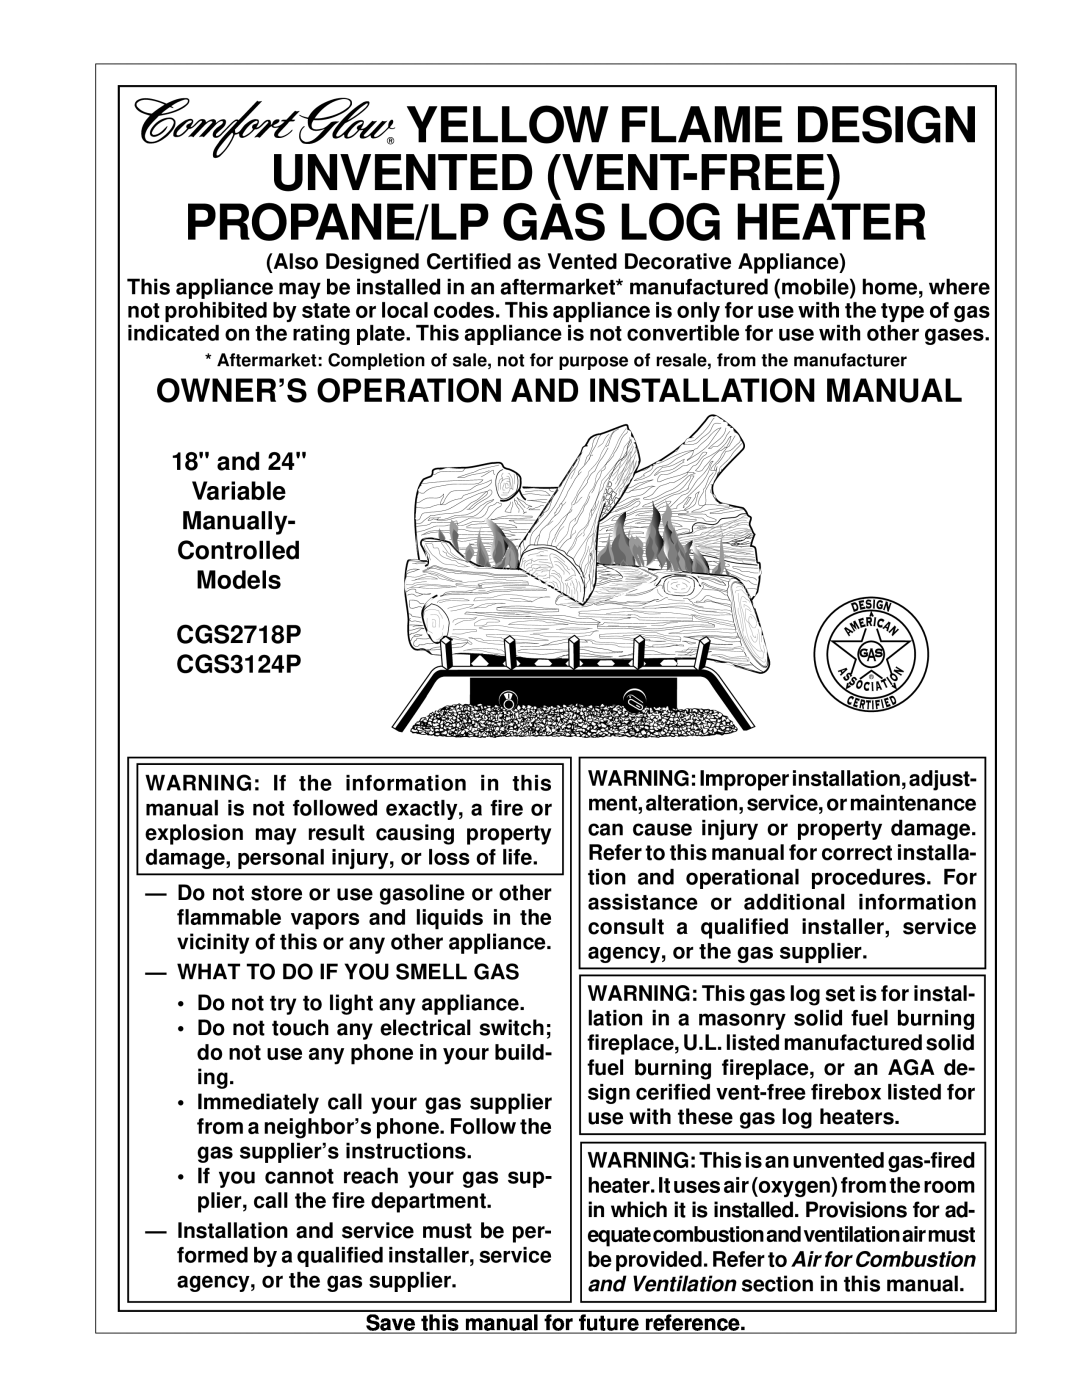 Desa installation manual Owner’S Operation And Installation Manual, and Variable, CGS2718P CGS3124P 